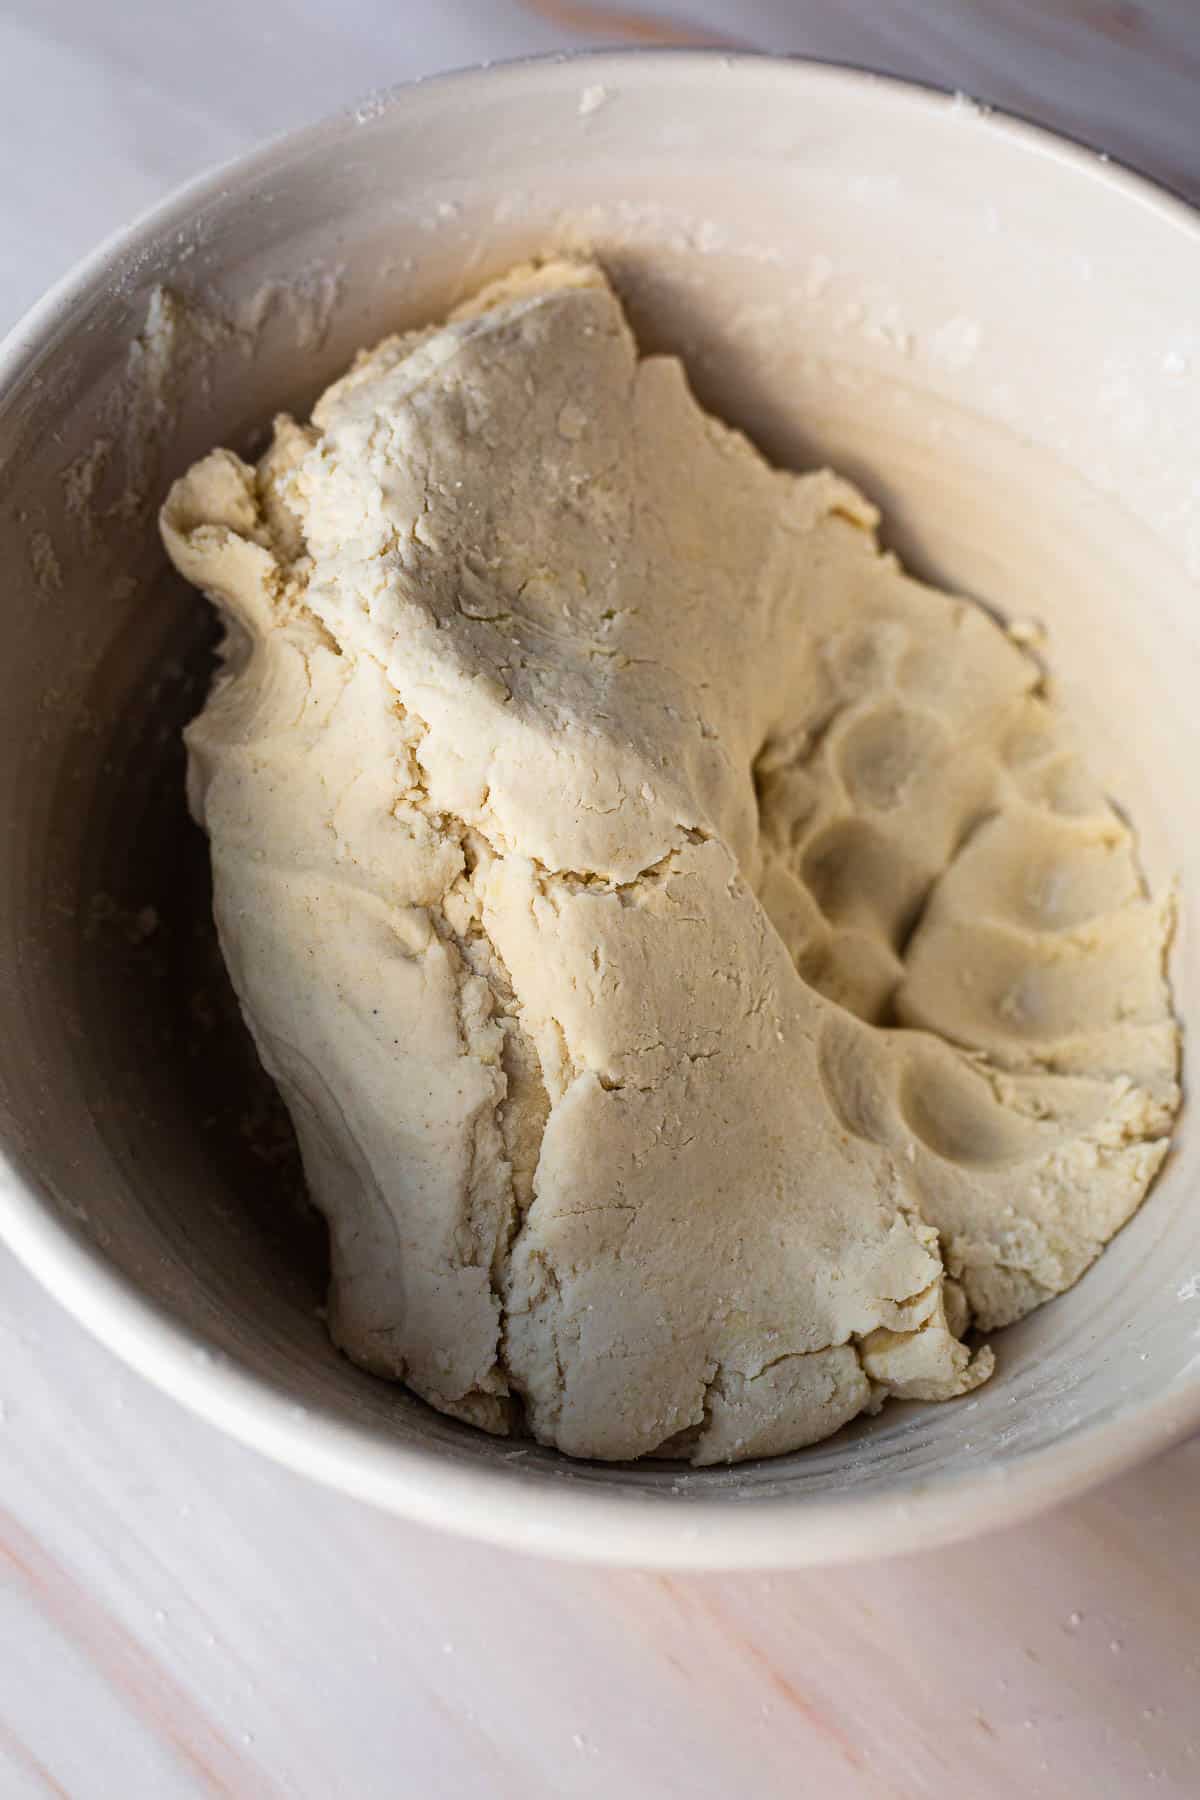 A close-up image of a bowl containing a freshly prepared, slightly textured gluten-free matzo dough, with visible indentations and creases, set on a light wooden surface.